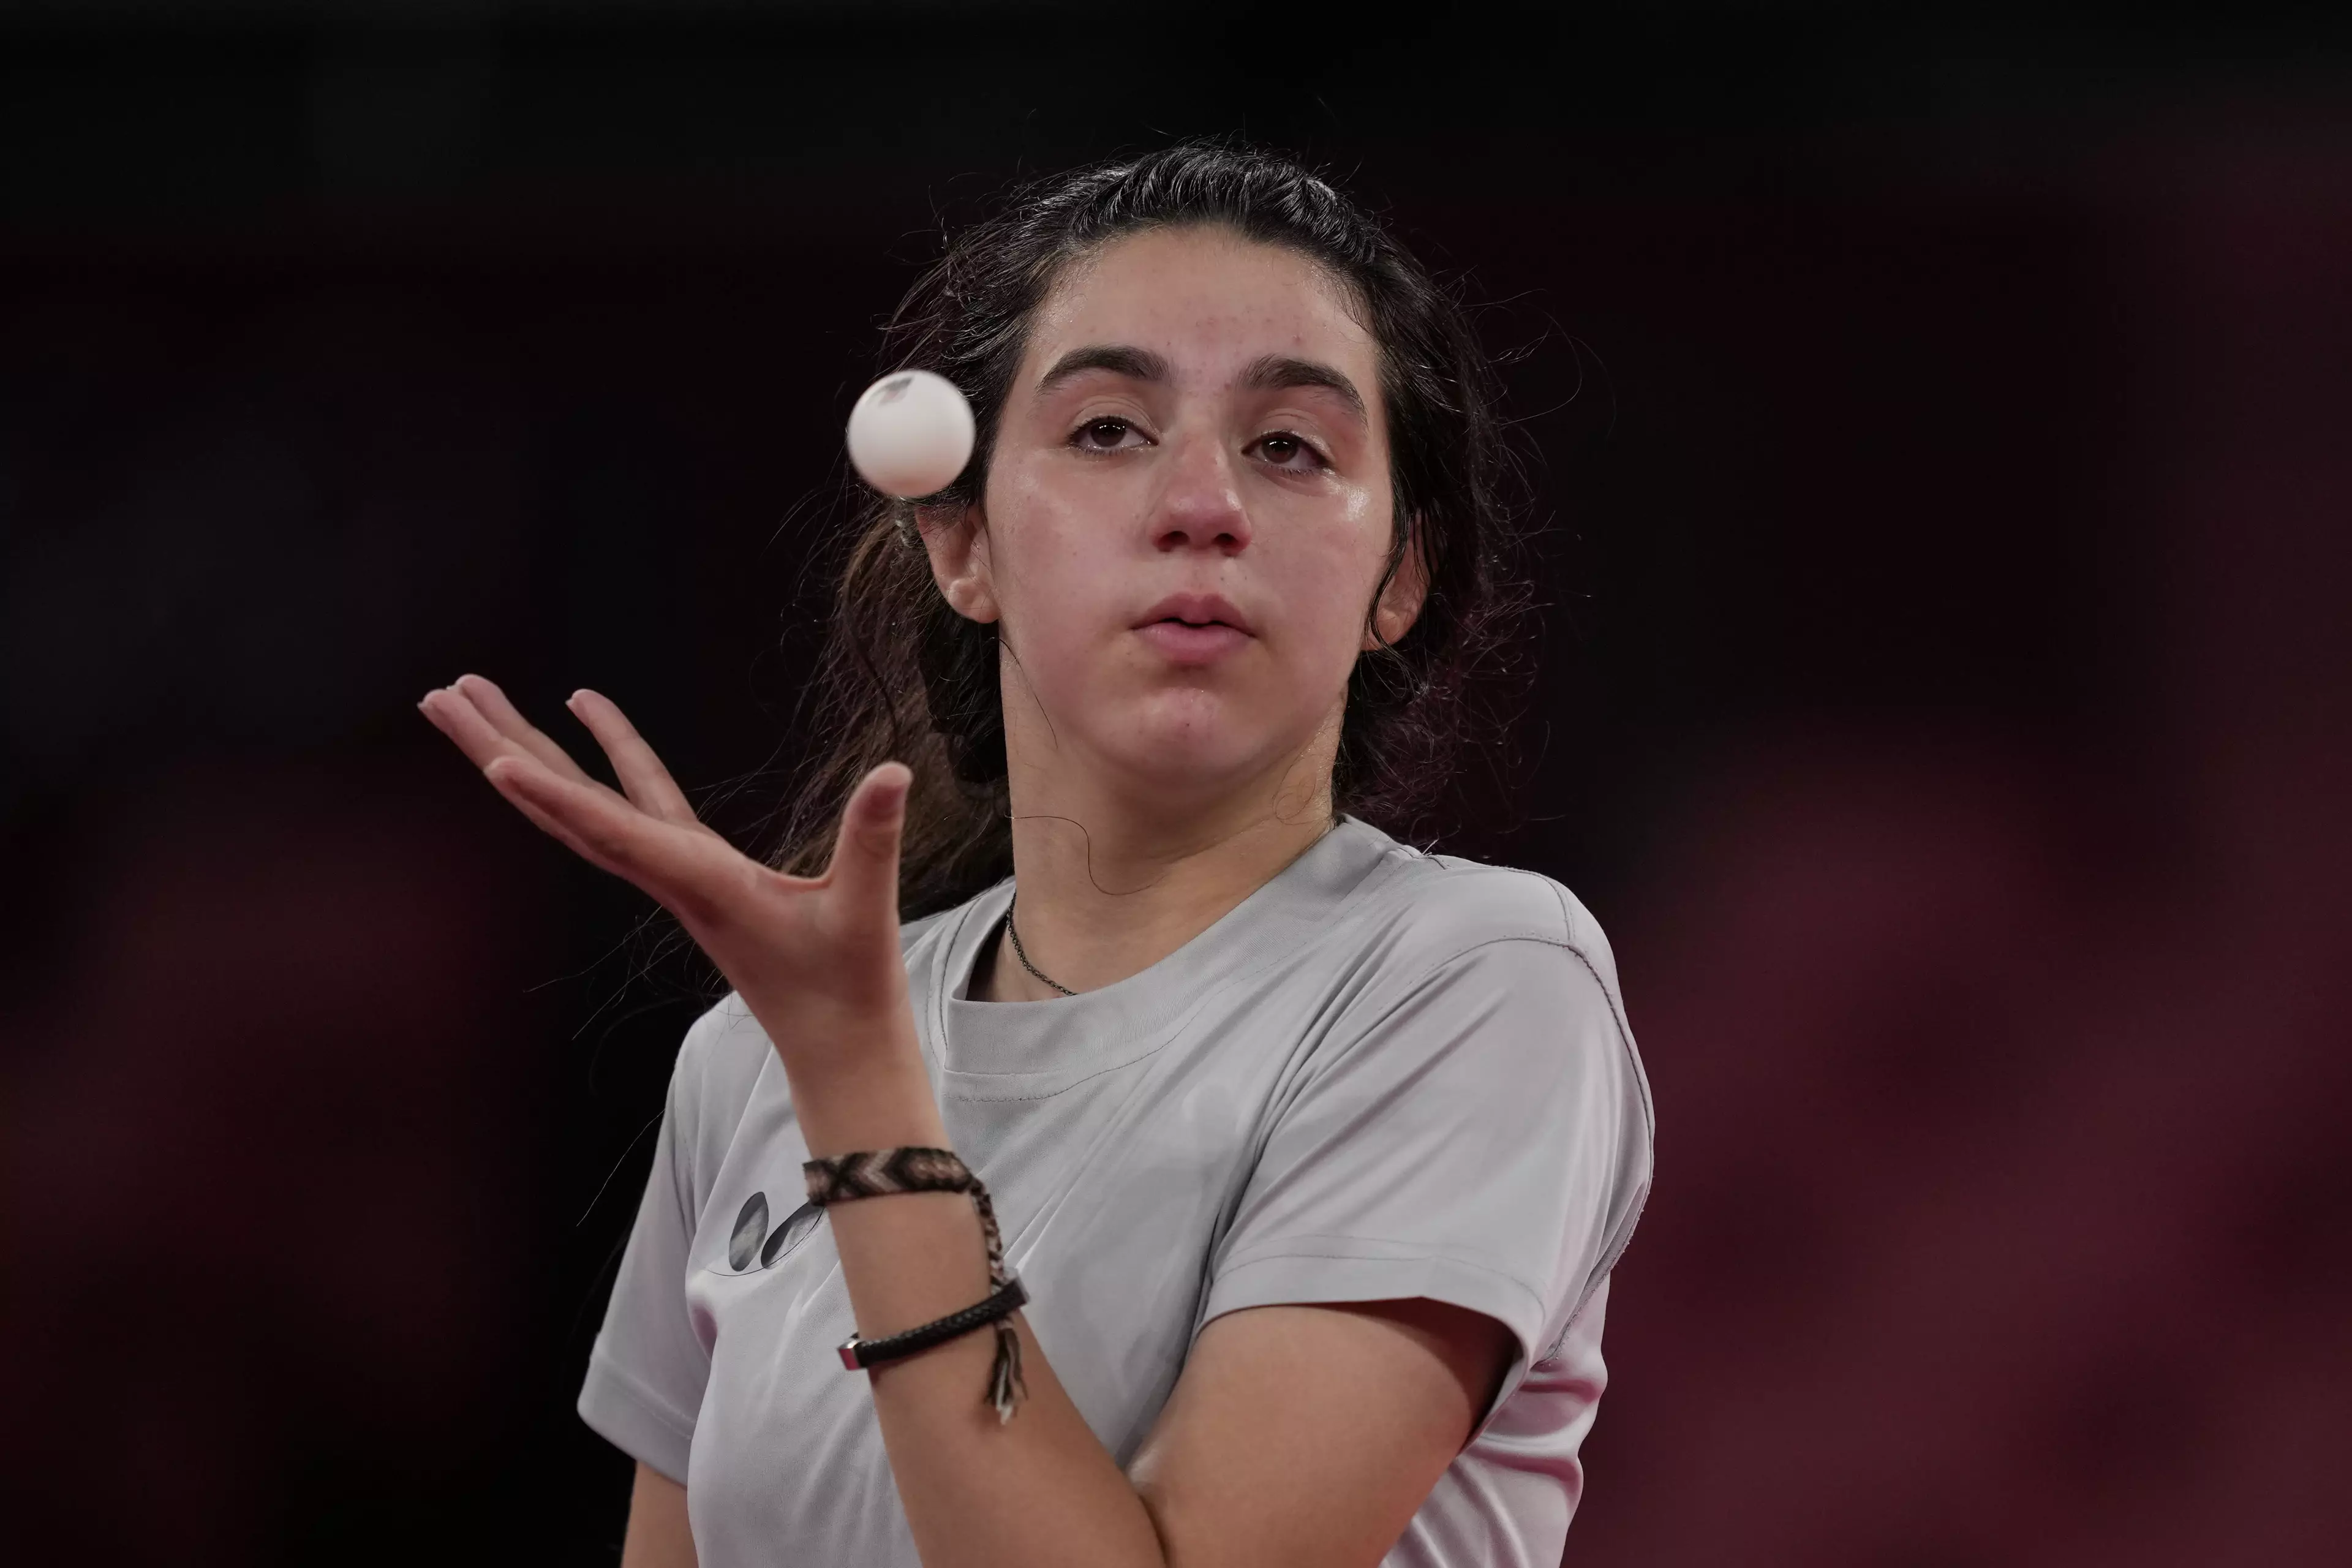 Hend Zaza from Syria is the youngest athlete at the Tokyo Olympics 2020. (